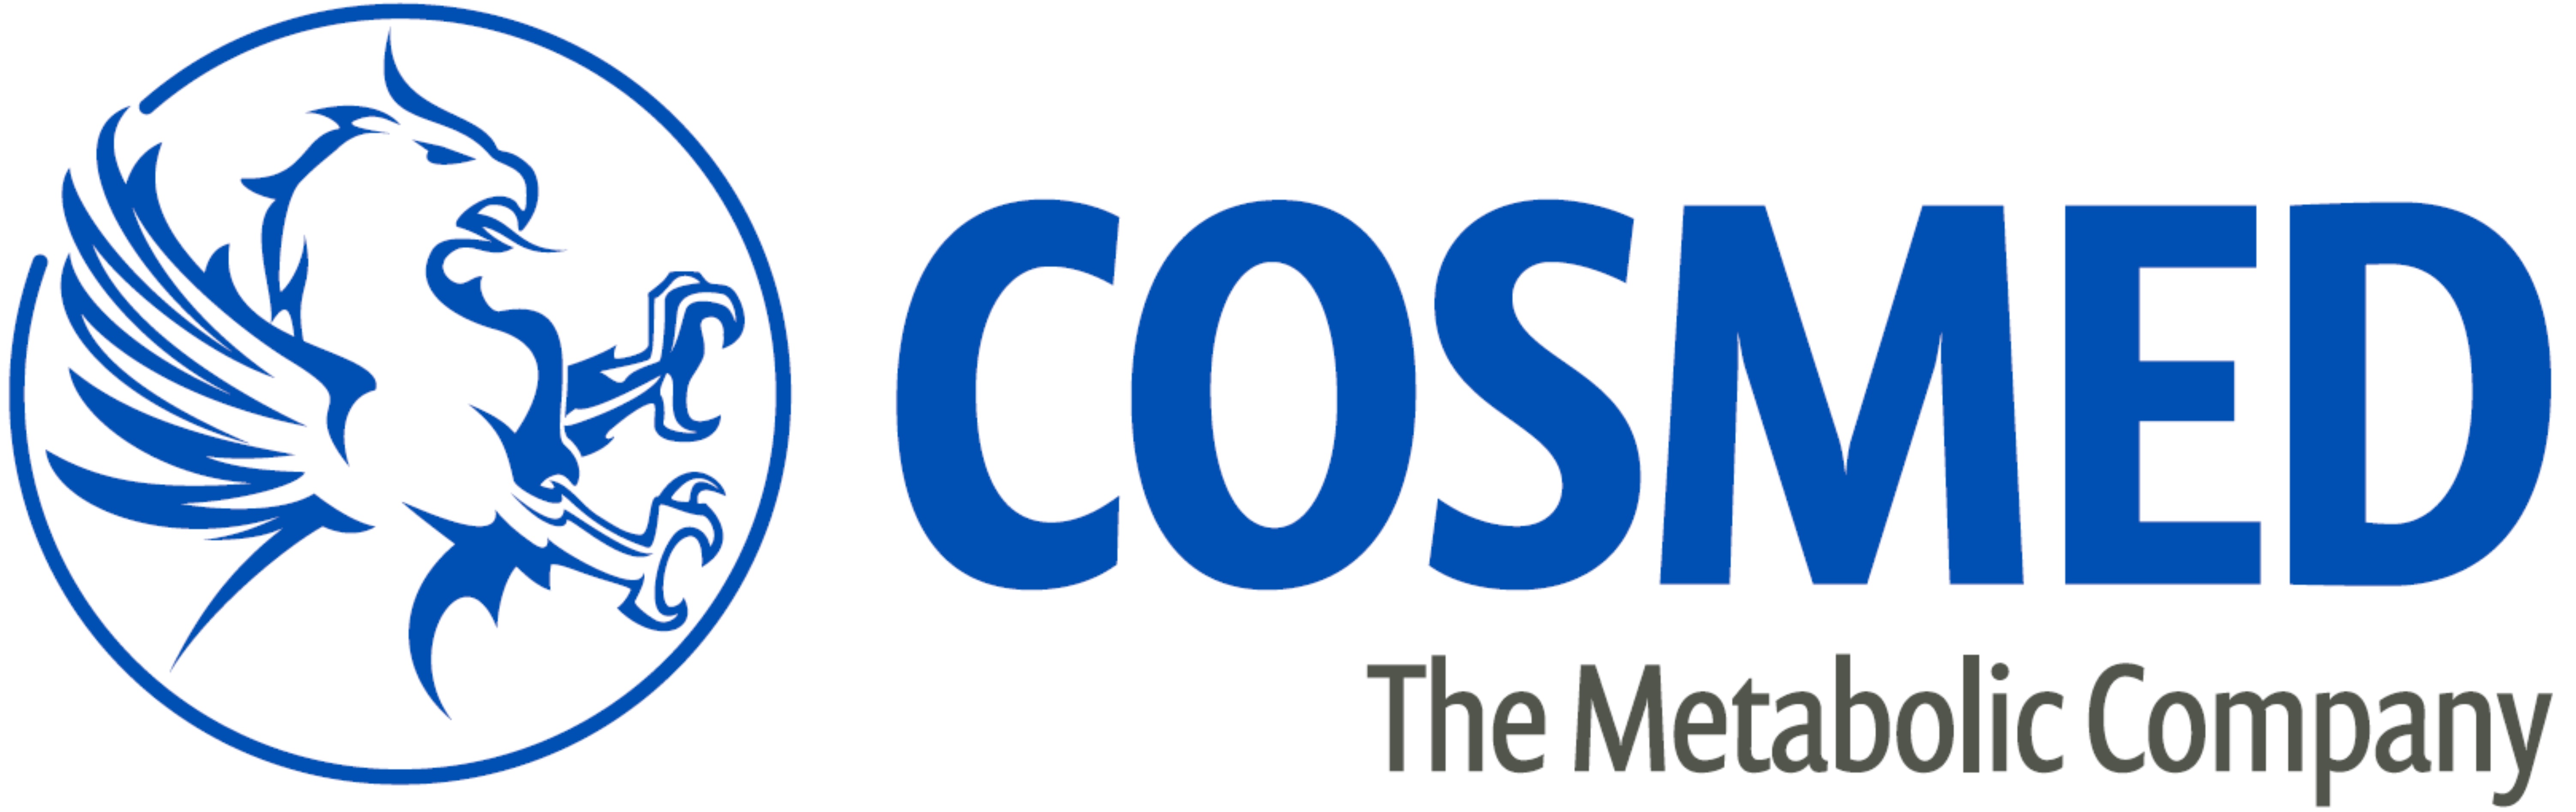 Email: info@cosmed.com Tel: +39069315492 Web: www.cosmed.com “Established in 1980, COSMED is a world-renowned supplier of Metabolic and Body Composition testing solutions. During ESPEN 2018 COSMED will introduce Q-NRG, the new generation of indirect calorimetry specifically intended for the measurement of Resting Energy Expenditure (REE) in patients who are mechanically ventilated or spontaneously breathing and for healthy subjects. Our collaboration with world-class institutes in the field of clinical nutrition helped in developing an accurate metabolic system, easy to use and at the same time resolving all typical pitfalls of indirect calorimetry technology (no warm-up time, no gas calibrations, etc.).”